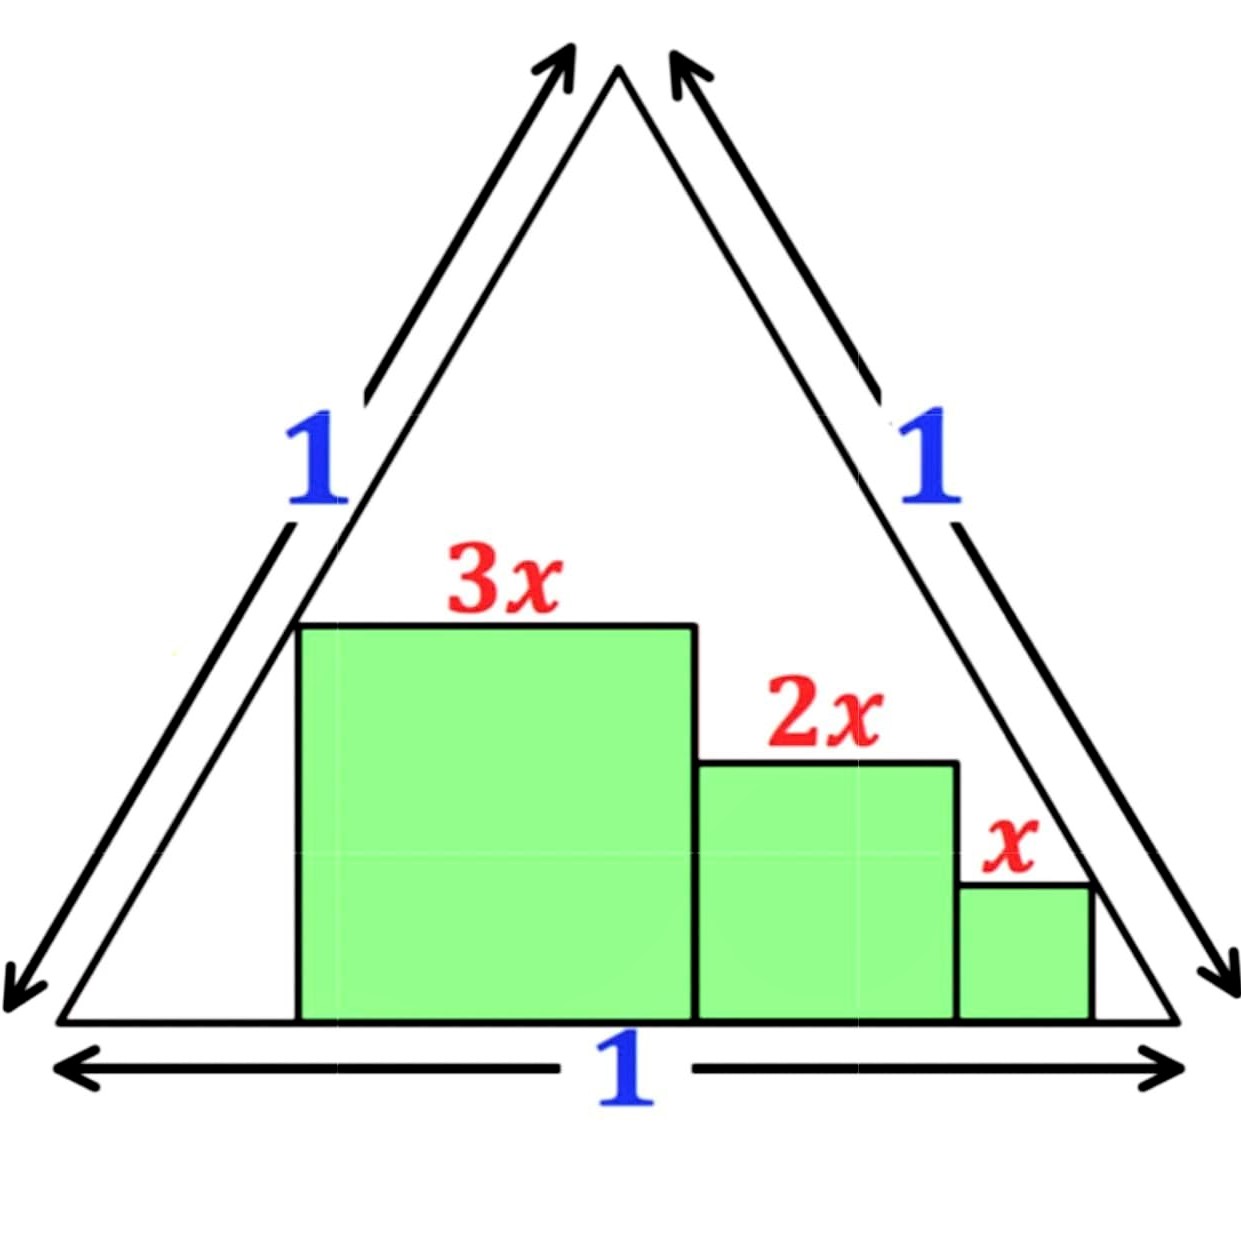 Math puzzle: Given an equilateral triangle and three squares as shown, find x